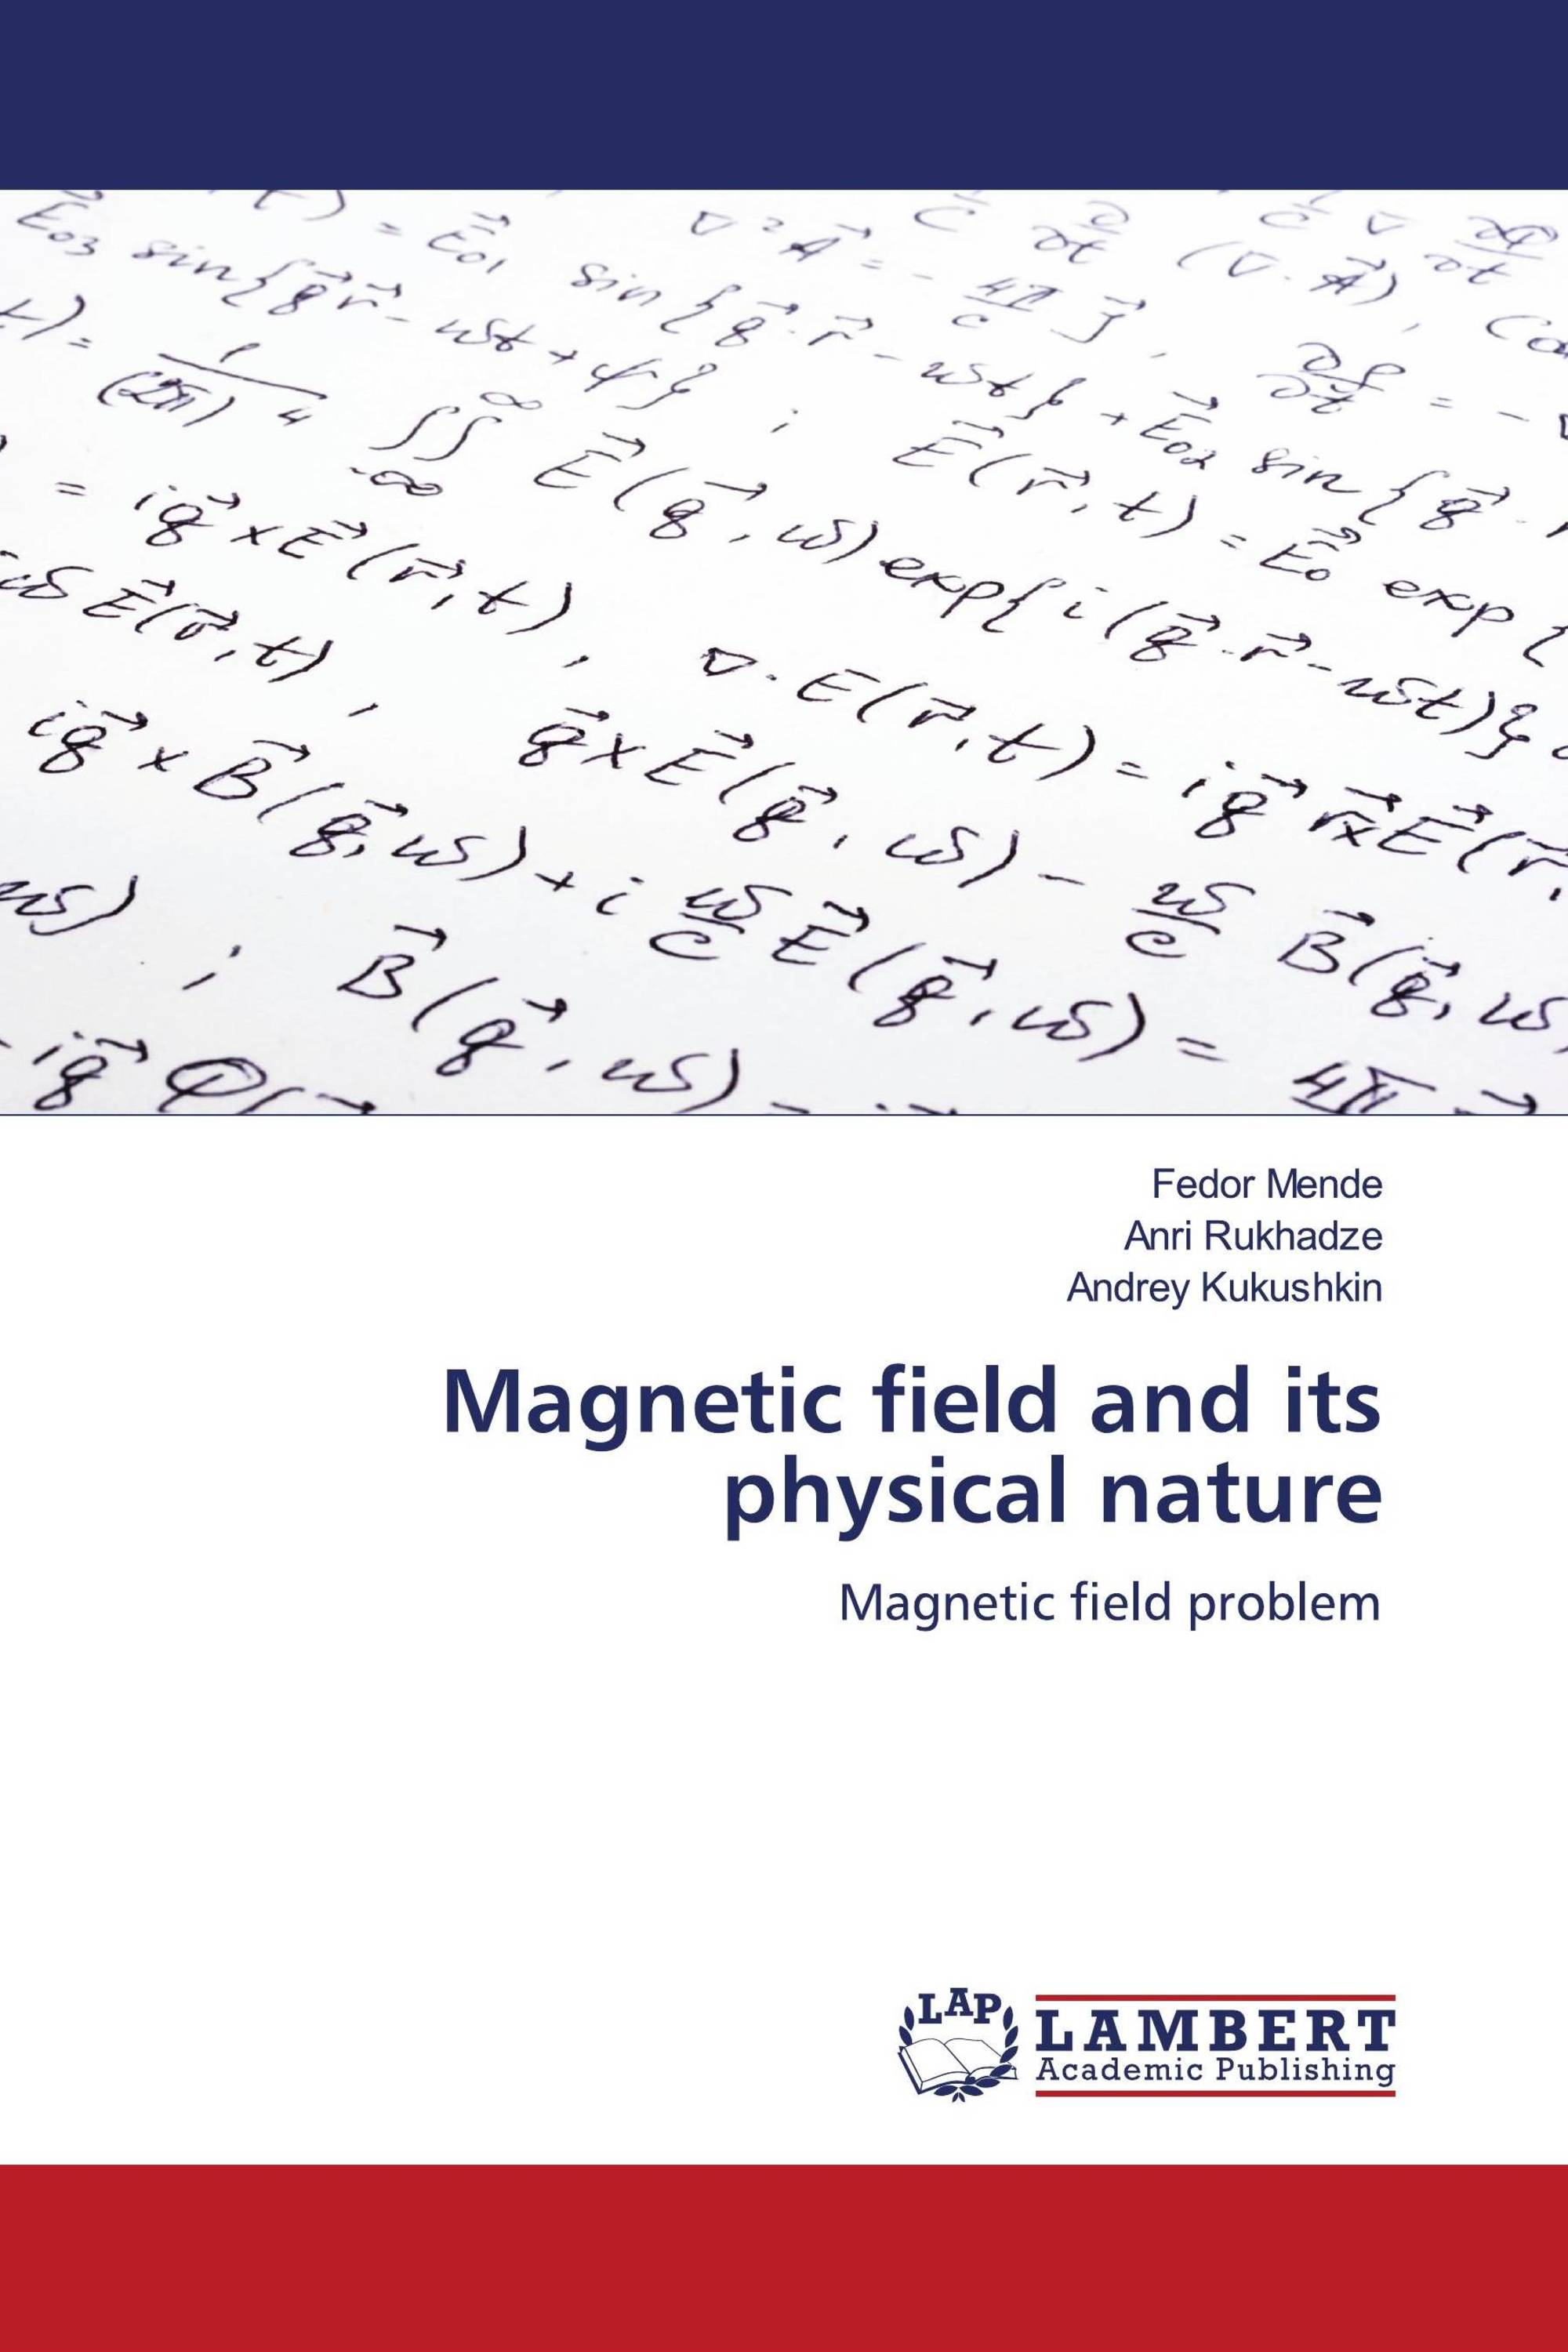 Magnetic field and its physical nature